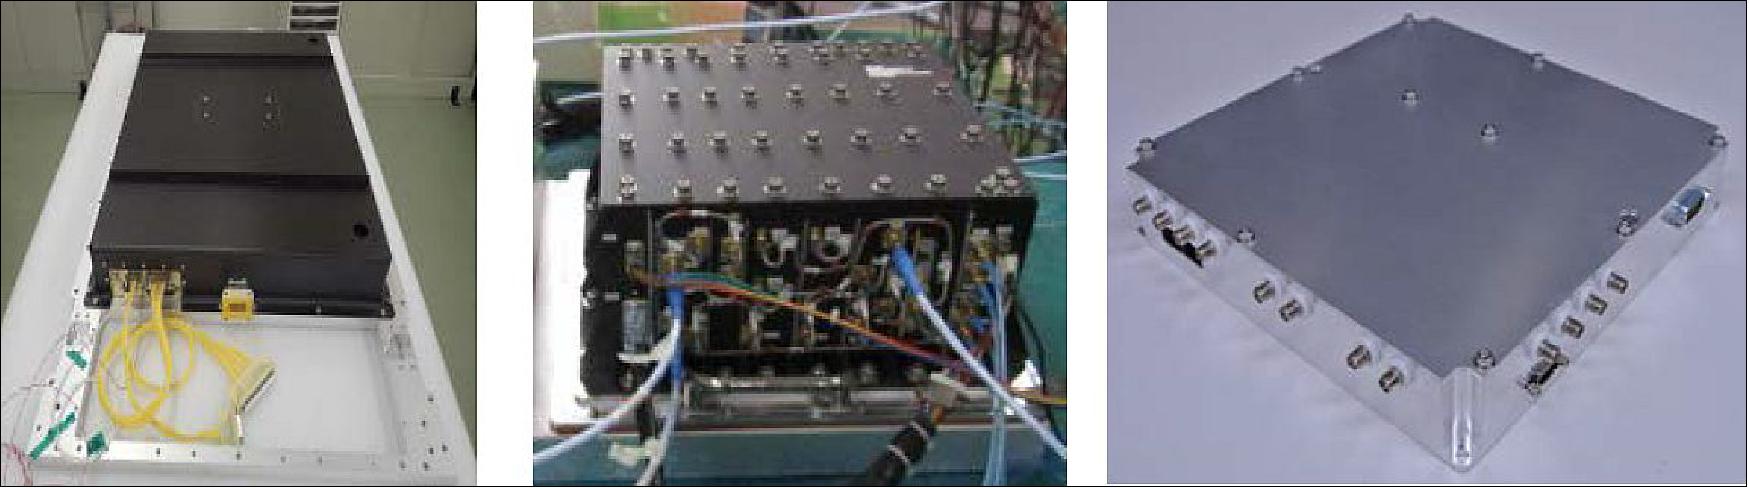 Figure 1: Left: 1kW X-band power amplifier installed on satellite body. Center: SAR Electronics Unit converted from air plane application. Right : 768GB, 2Gbit/s Mission Data Recorder with NAND memory (image credit: Synspective)